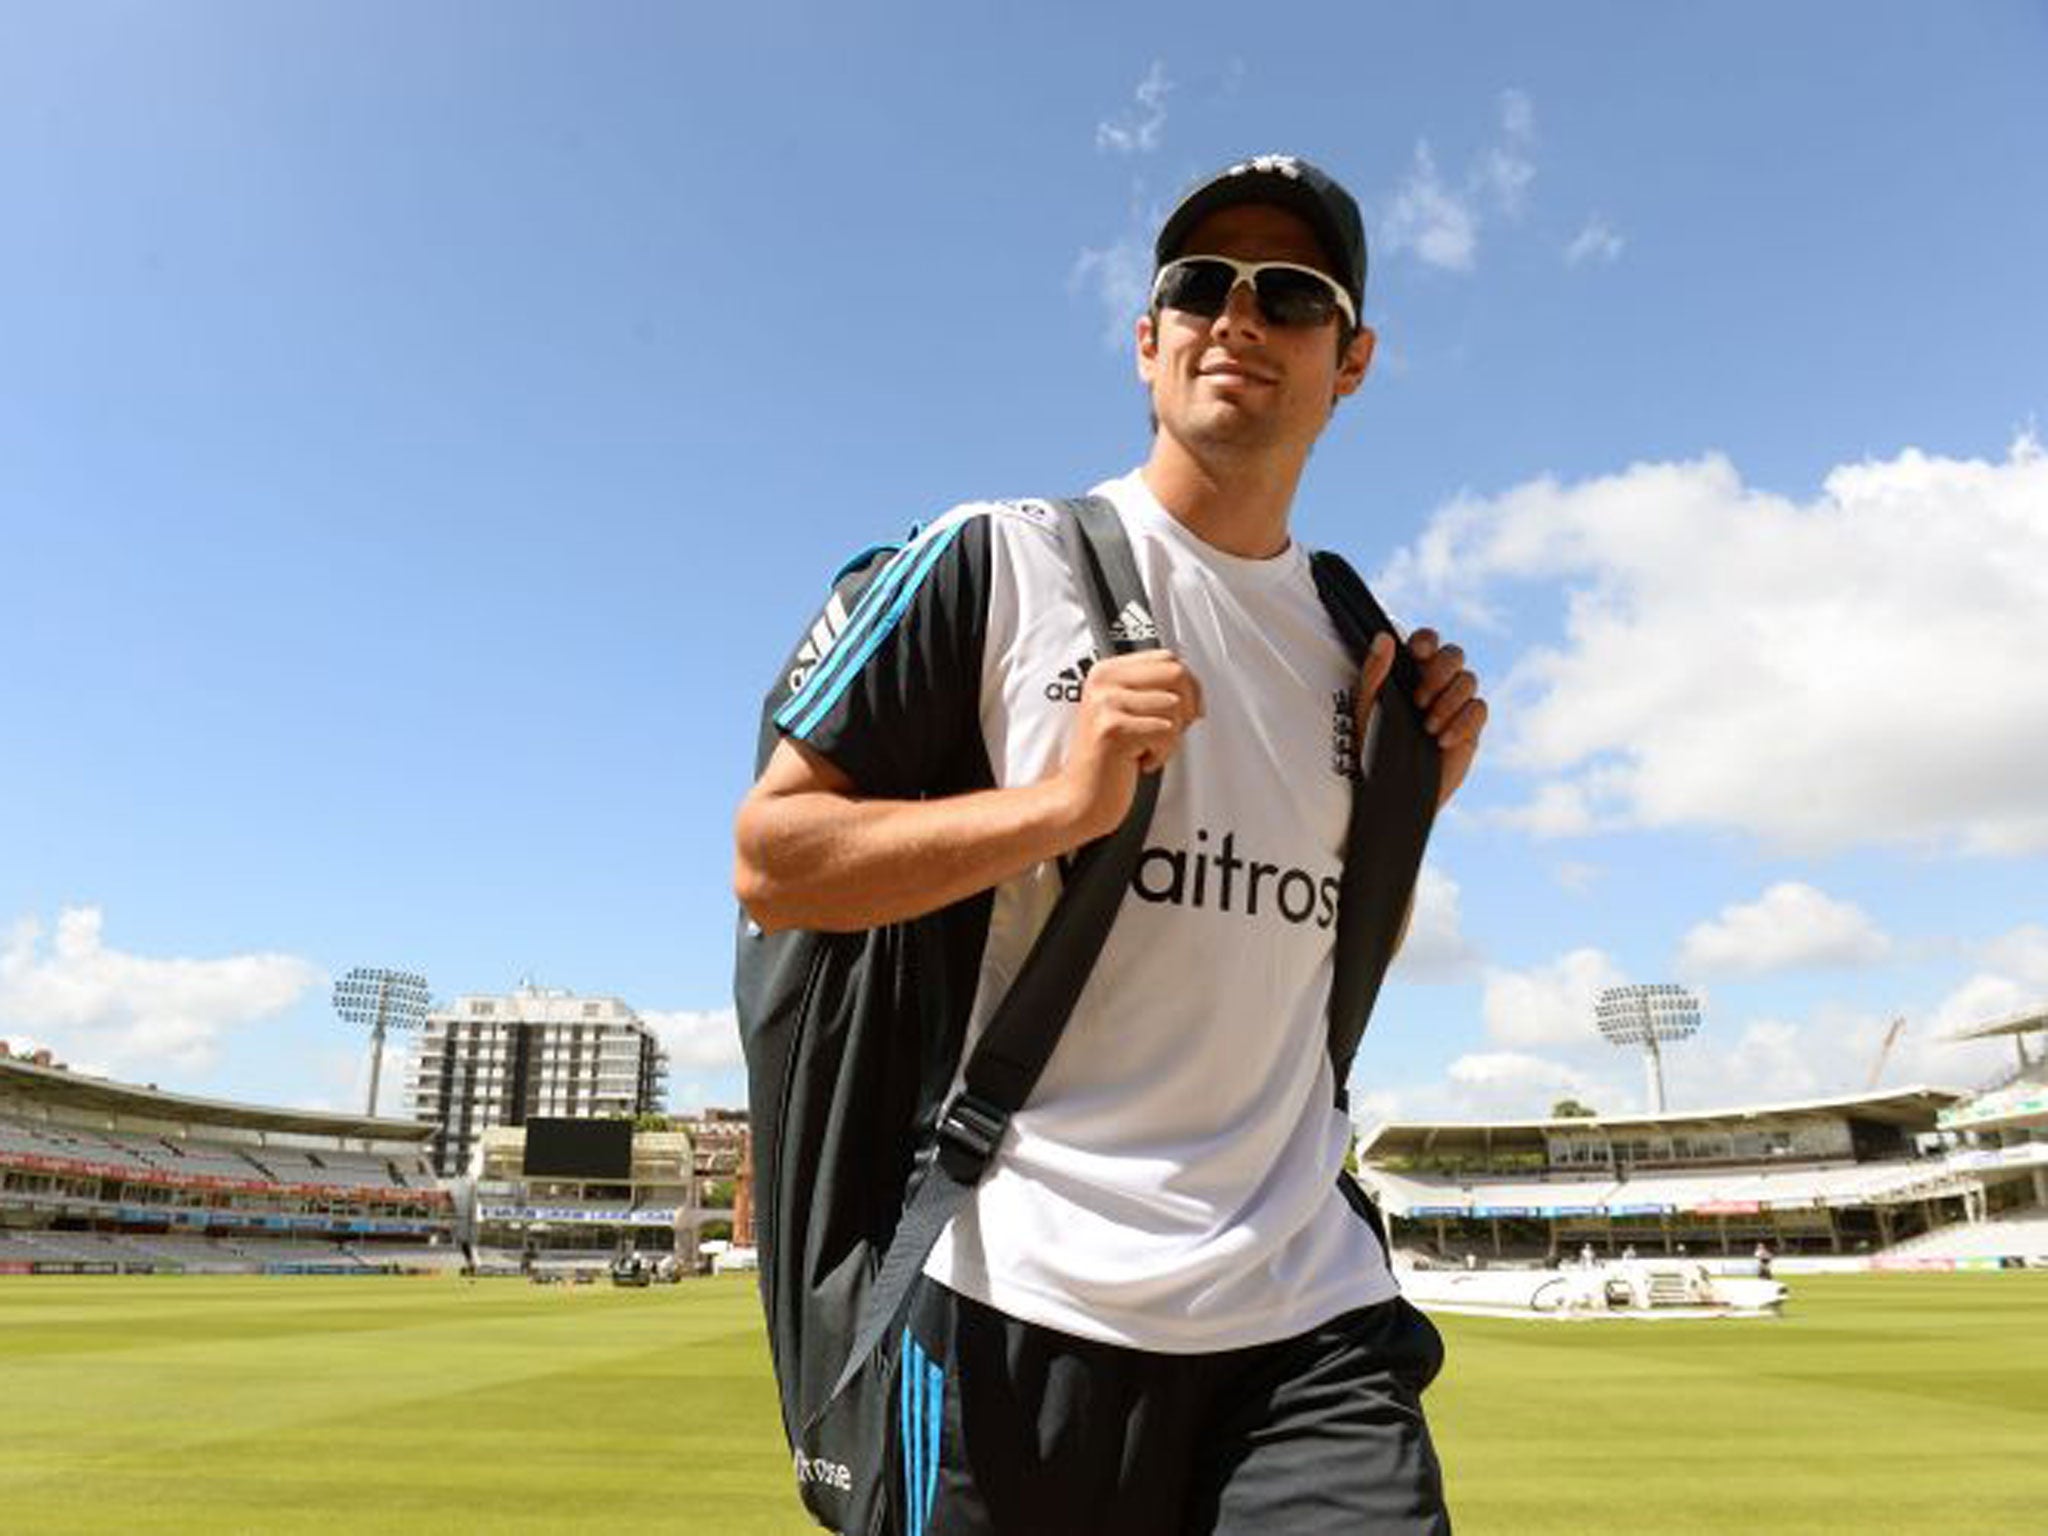 Alastair Cook, the England captain, needs runs almost as much as a win